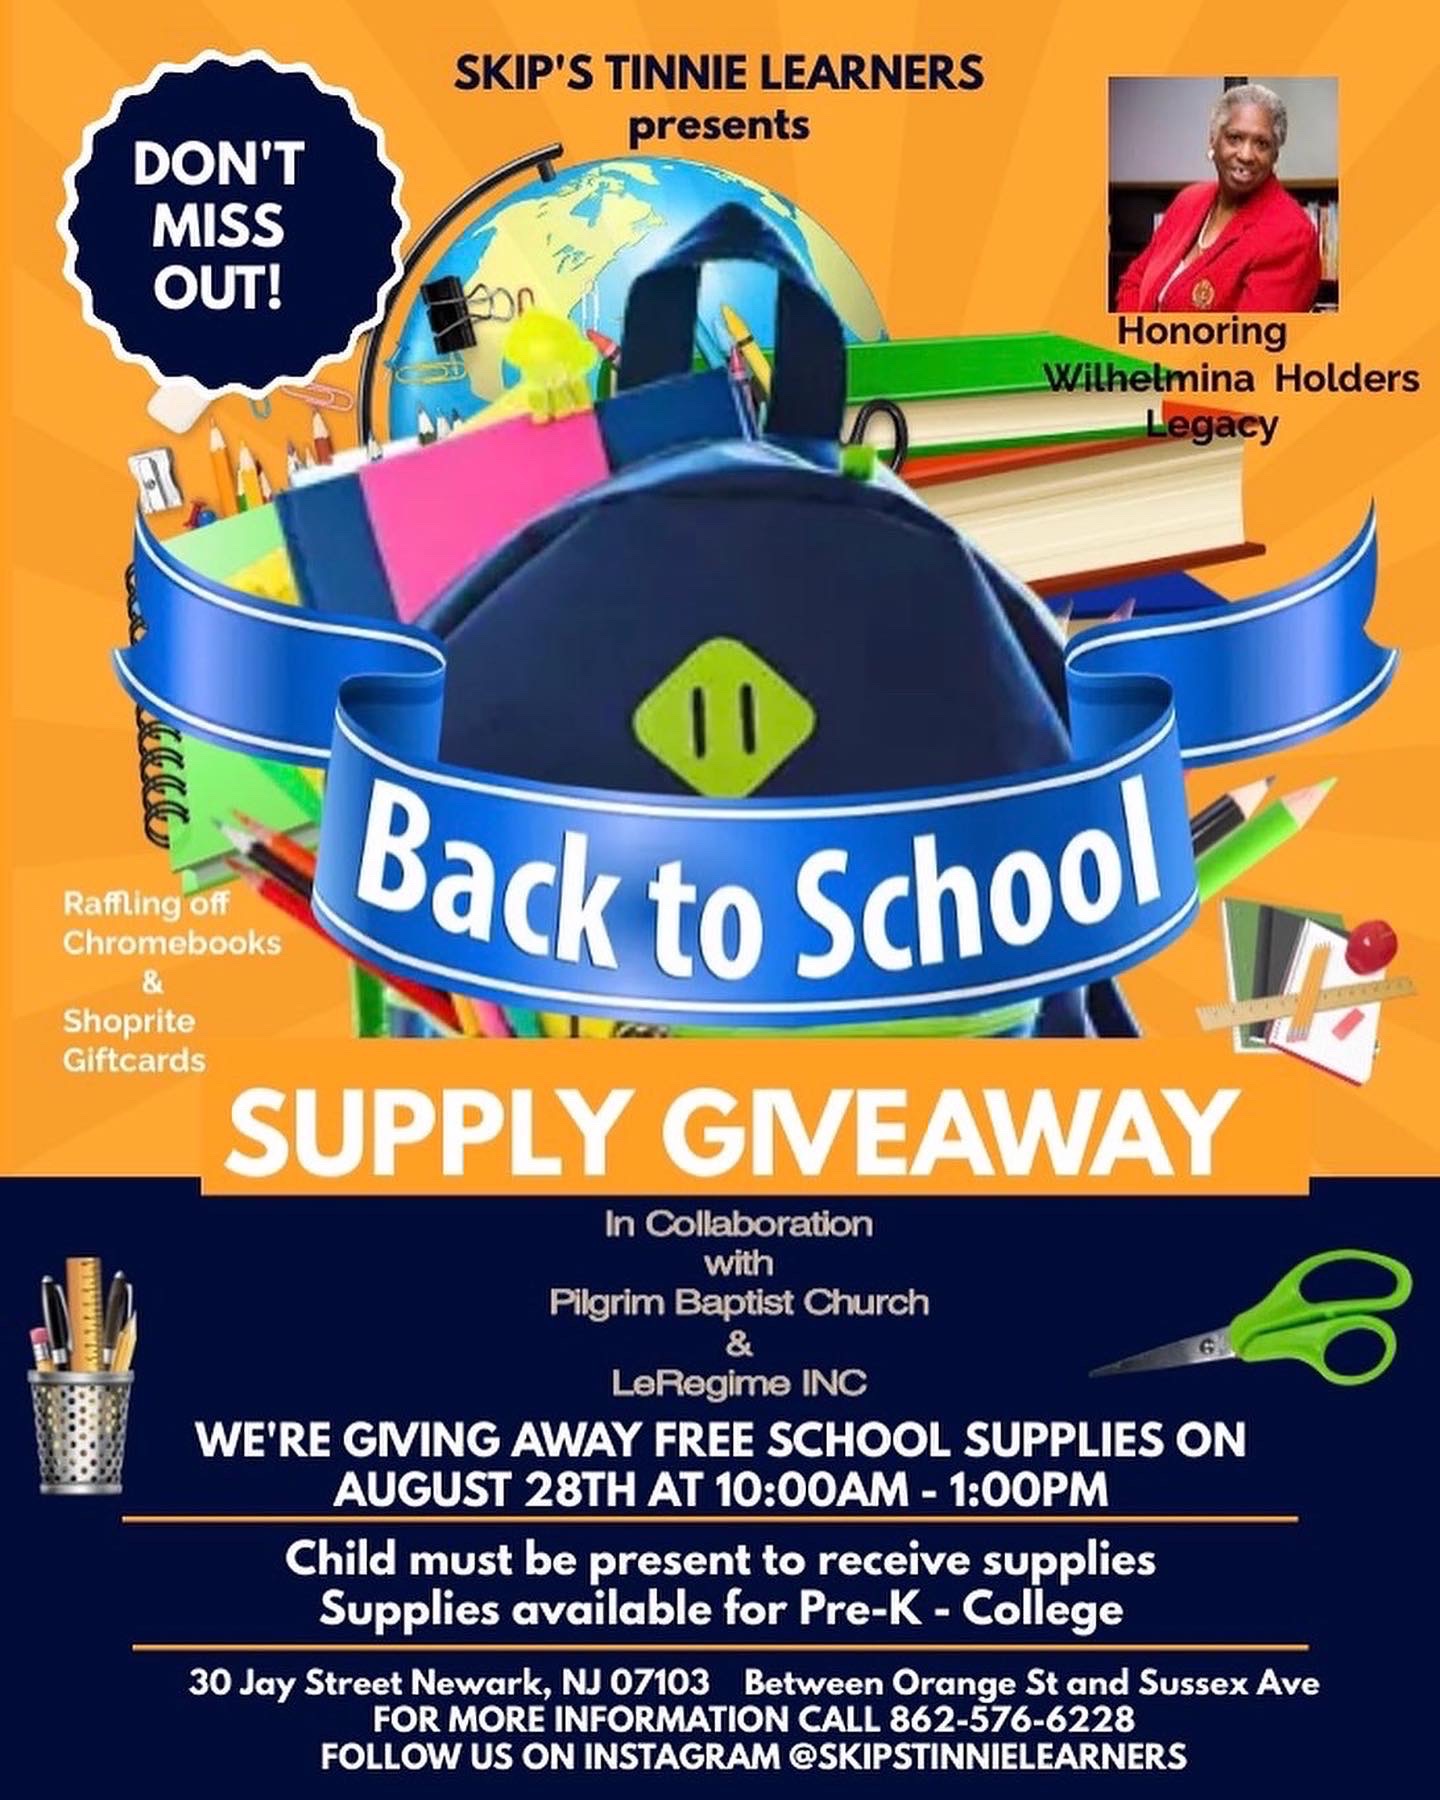 Newark Day Care to Hold Back to School Supply Giveaway to Honor Ms